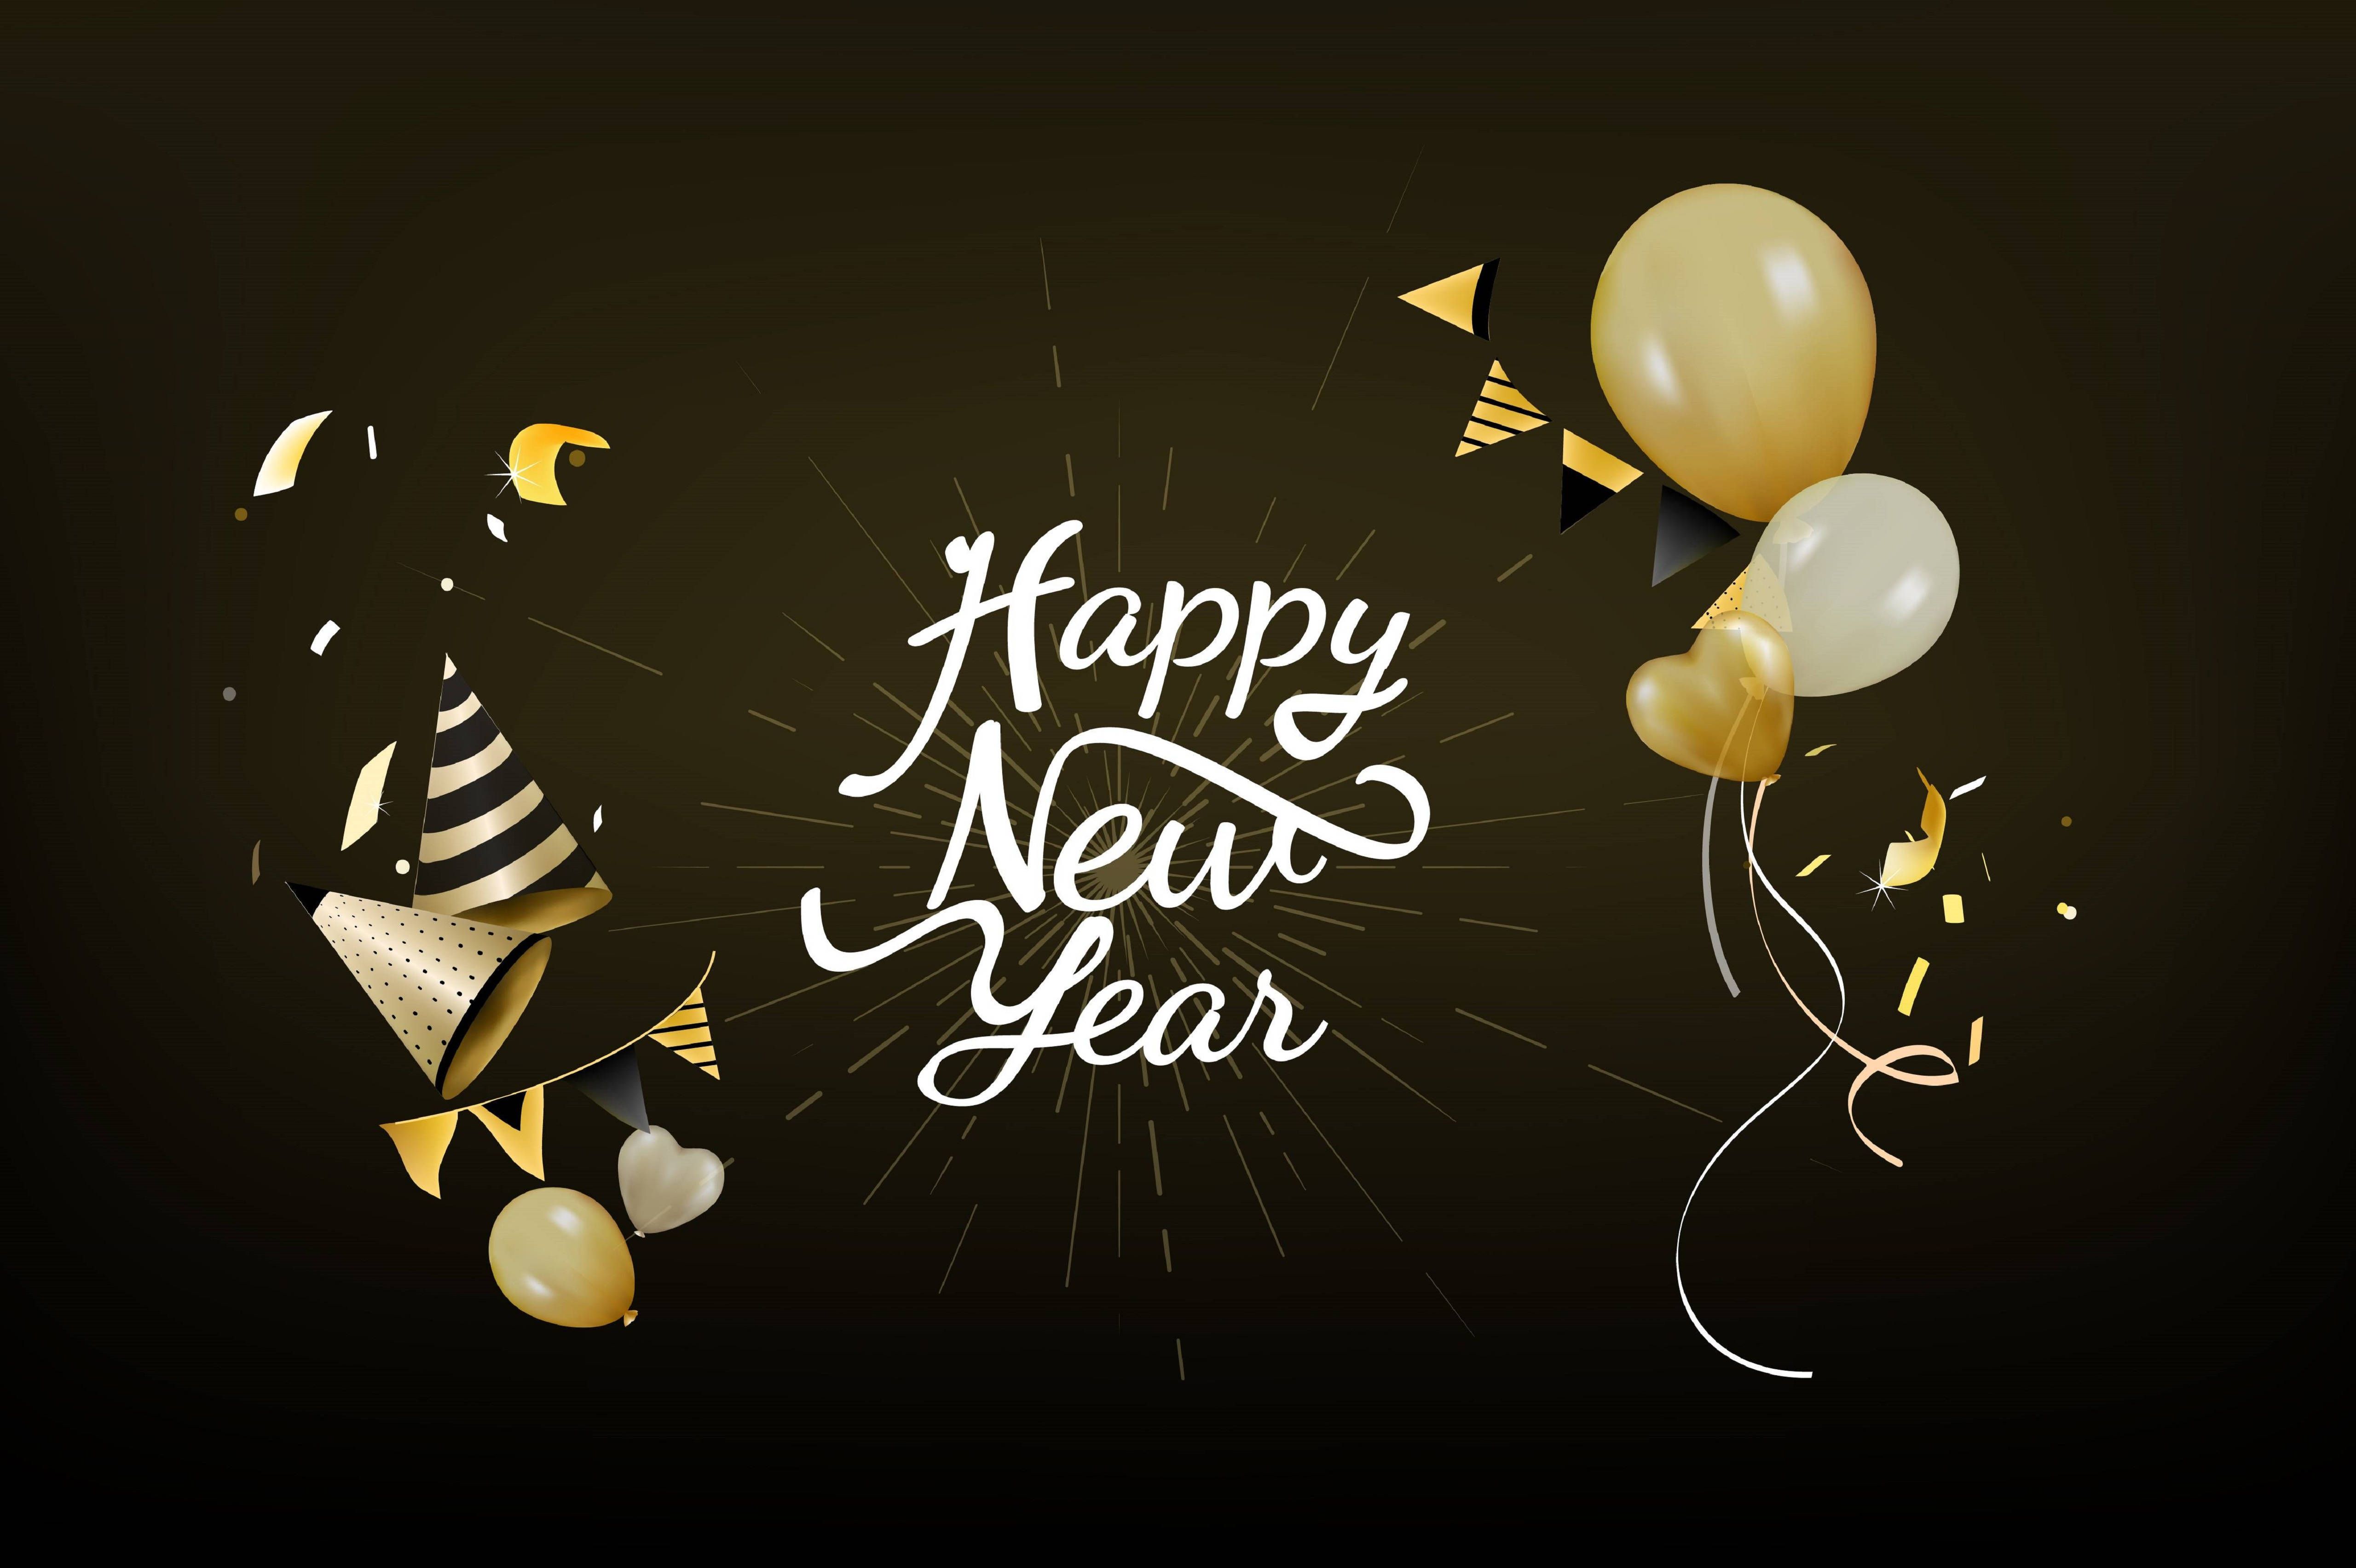 New Year's card with golden balloons and serpentine on a black background - Happy, New Year